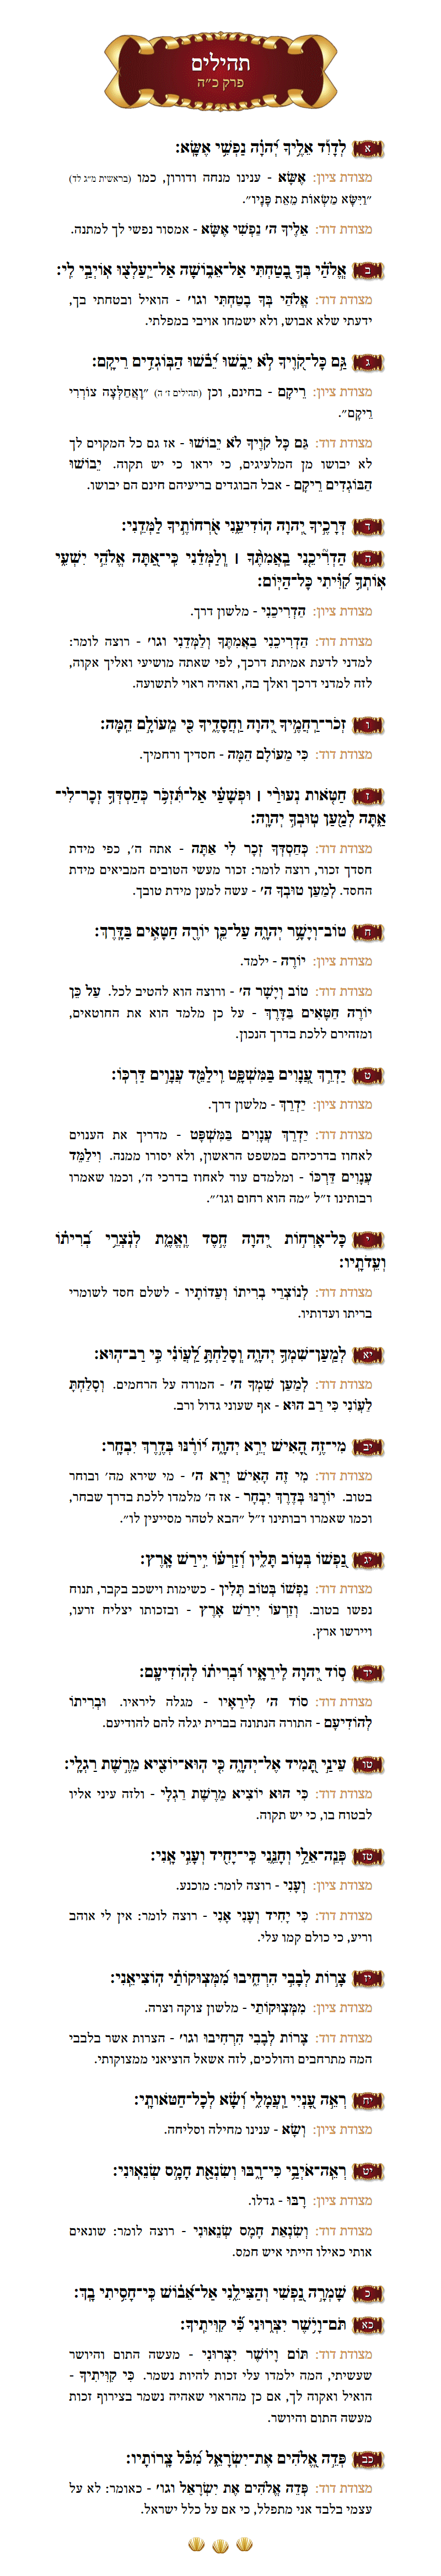 Sefer Tehillim Chapter 52 with commentary